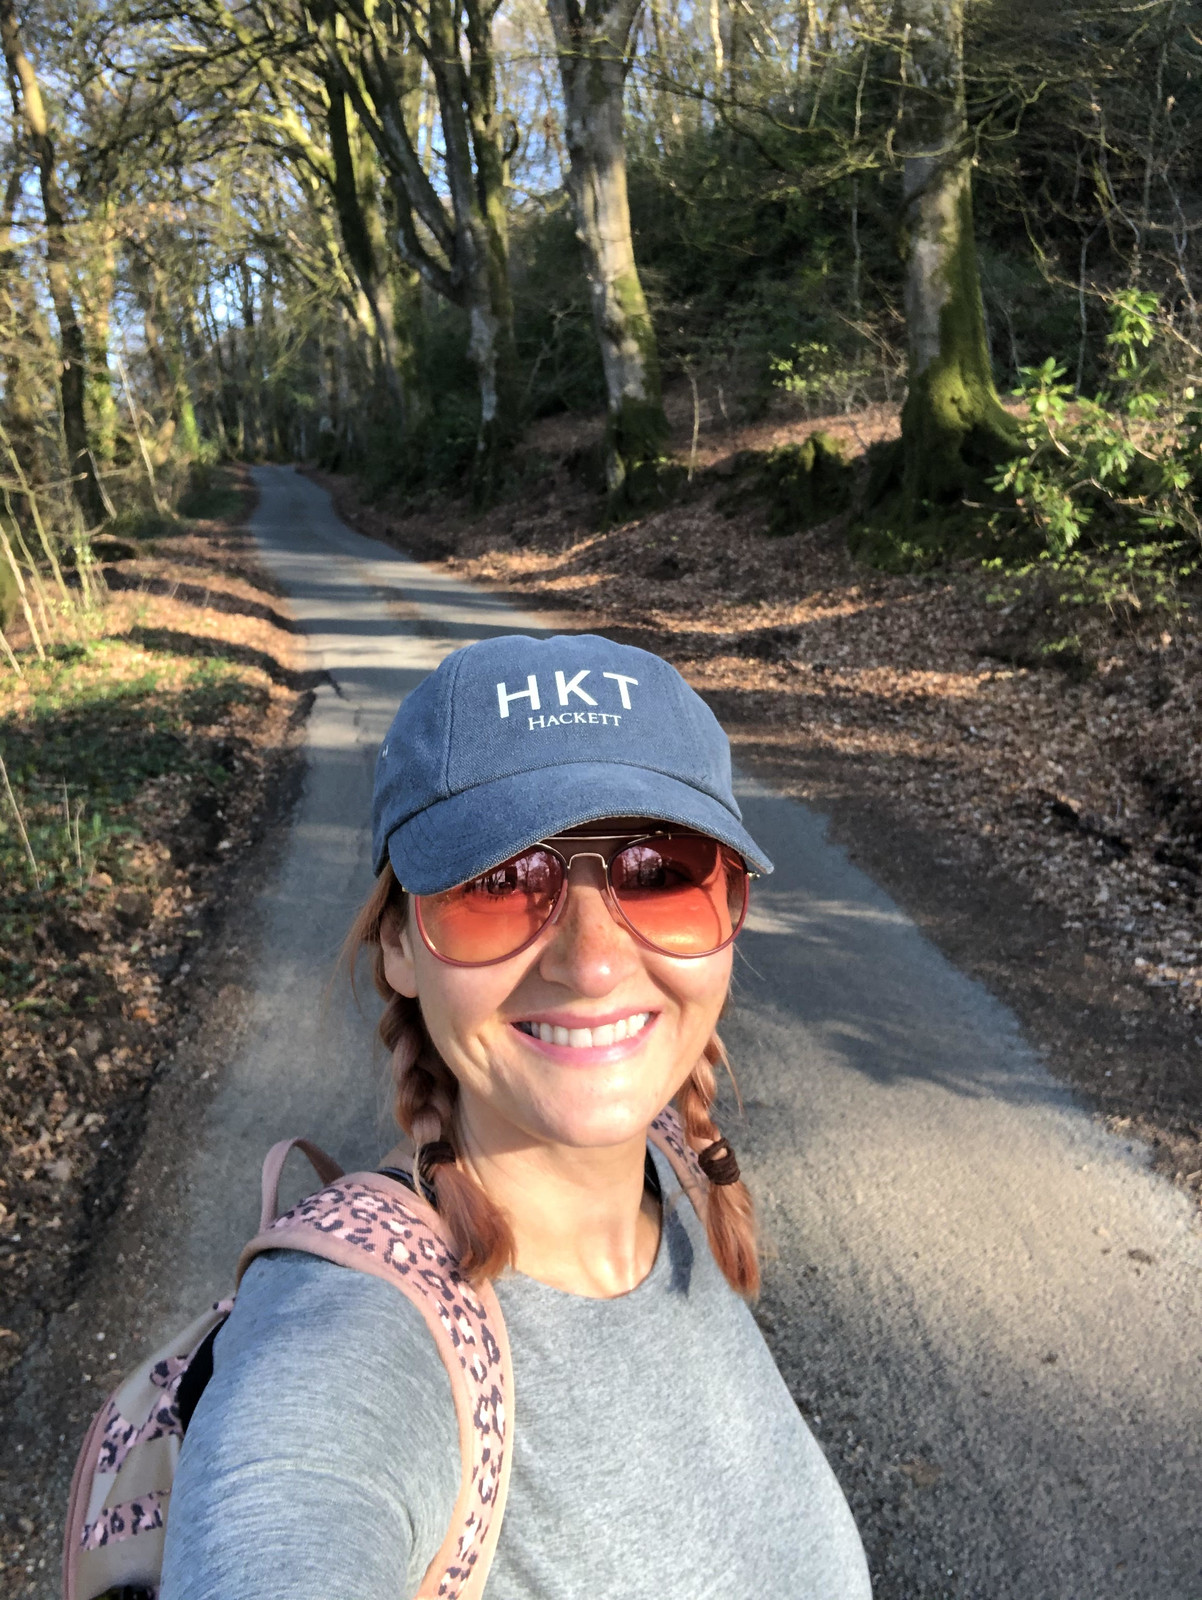 The Blog Changes Have Come... Back to Basics For Me (Selfie taken in the English countryside wearing sunglasses and a baseball cap) | Not Dressed As Lamb